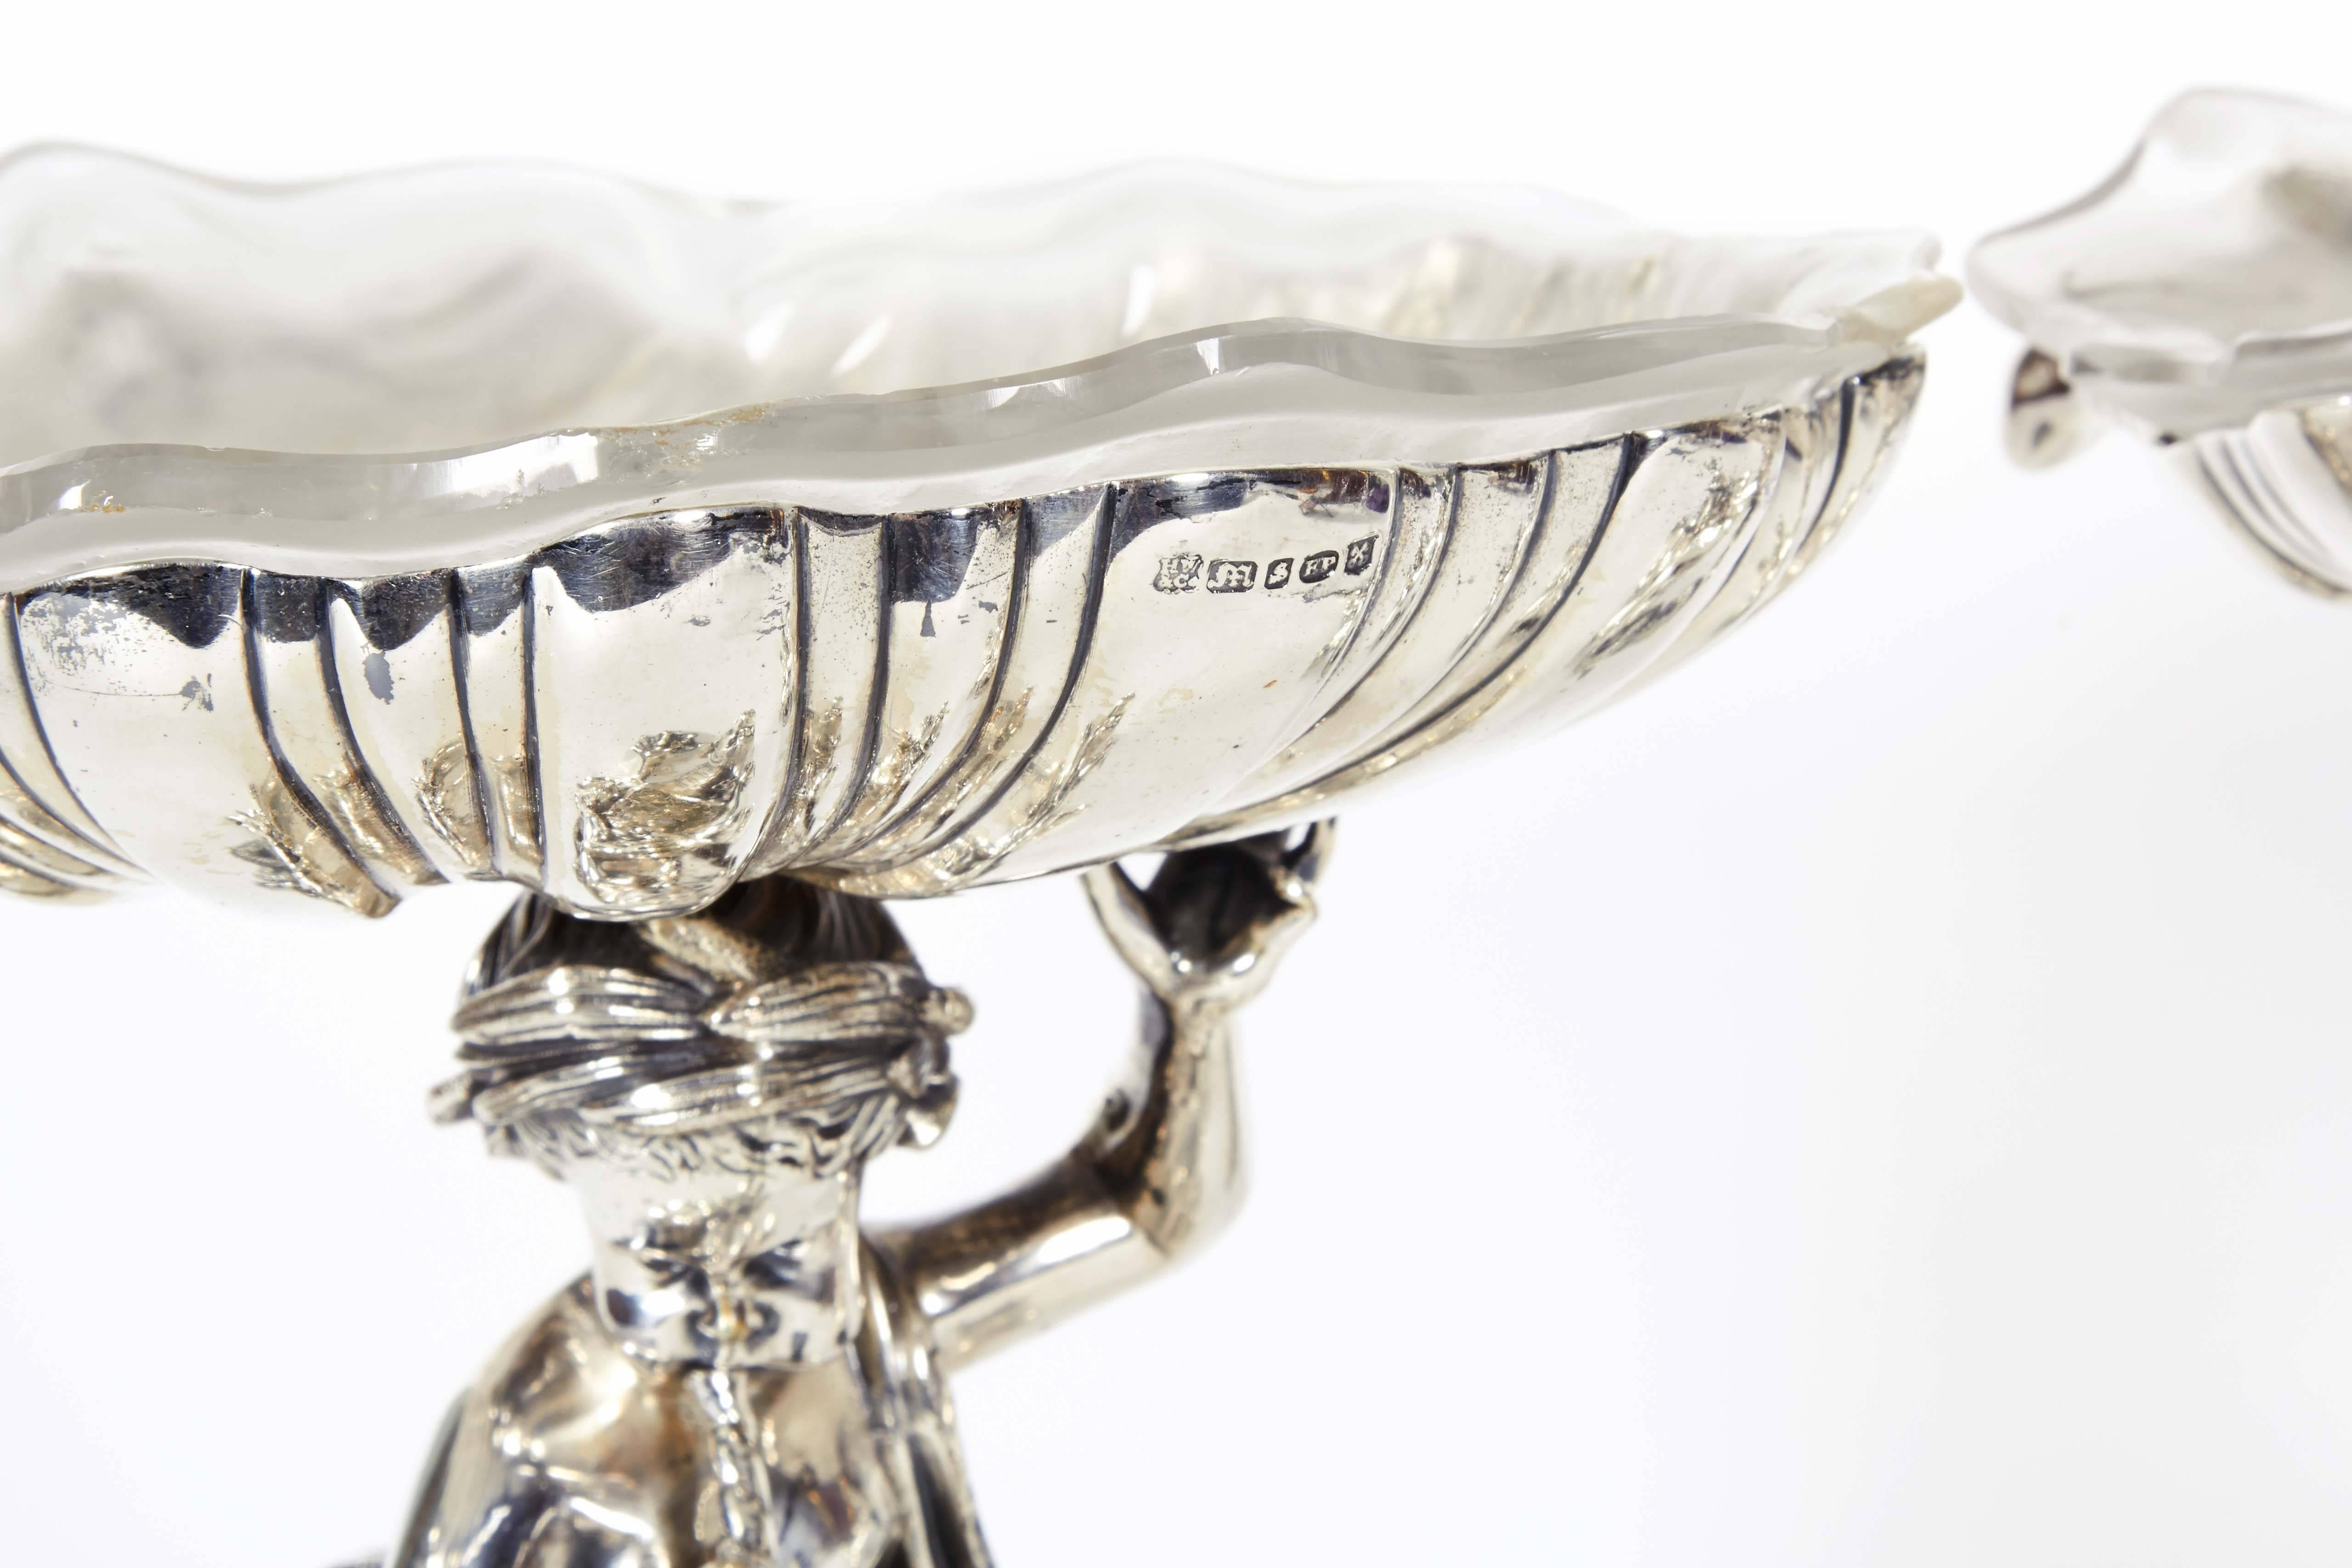 A very fine pair of English silver plated bronze and frosted glass tazza with cherubs / putti and sea dragons.

Original glass.

Henry Wilkinson & Co, Sheffield. Marked.

Henry Wilkinson & Co was involved in the manufacture of Old Sheffield